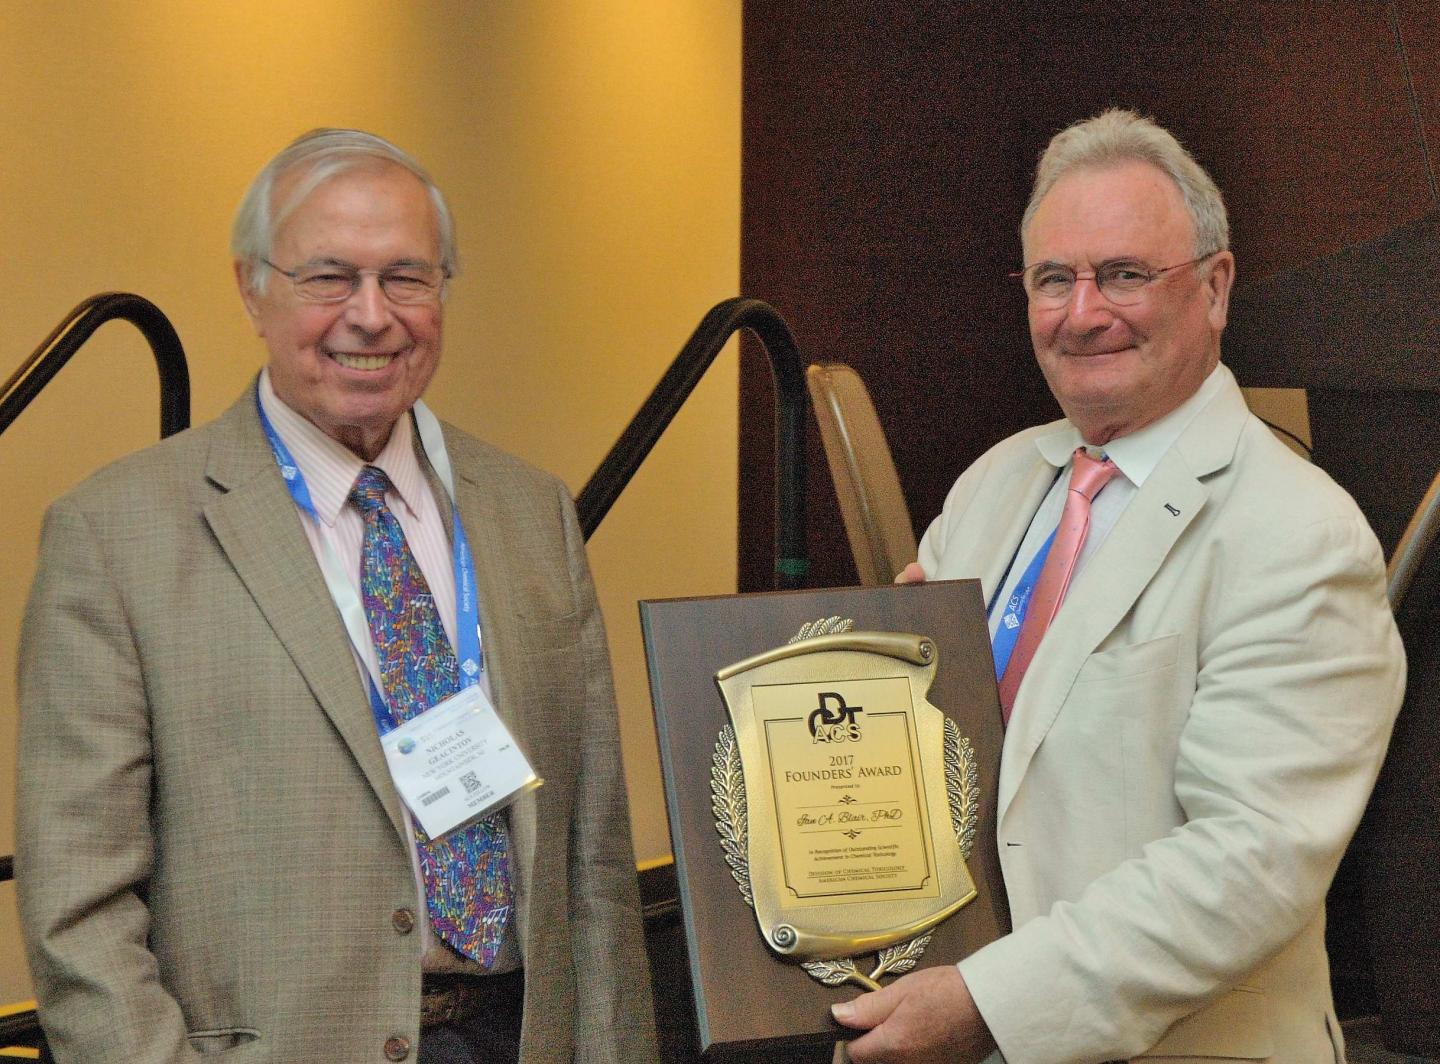 2017 Founders' Award from the Division of Chemical Toxicology of the American Chemical Society